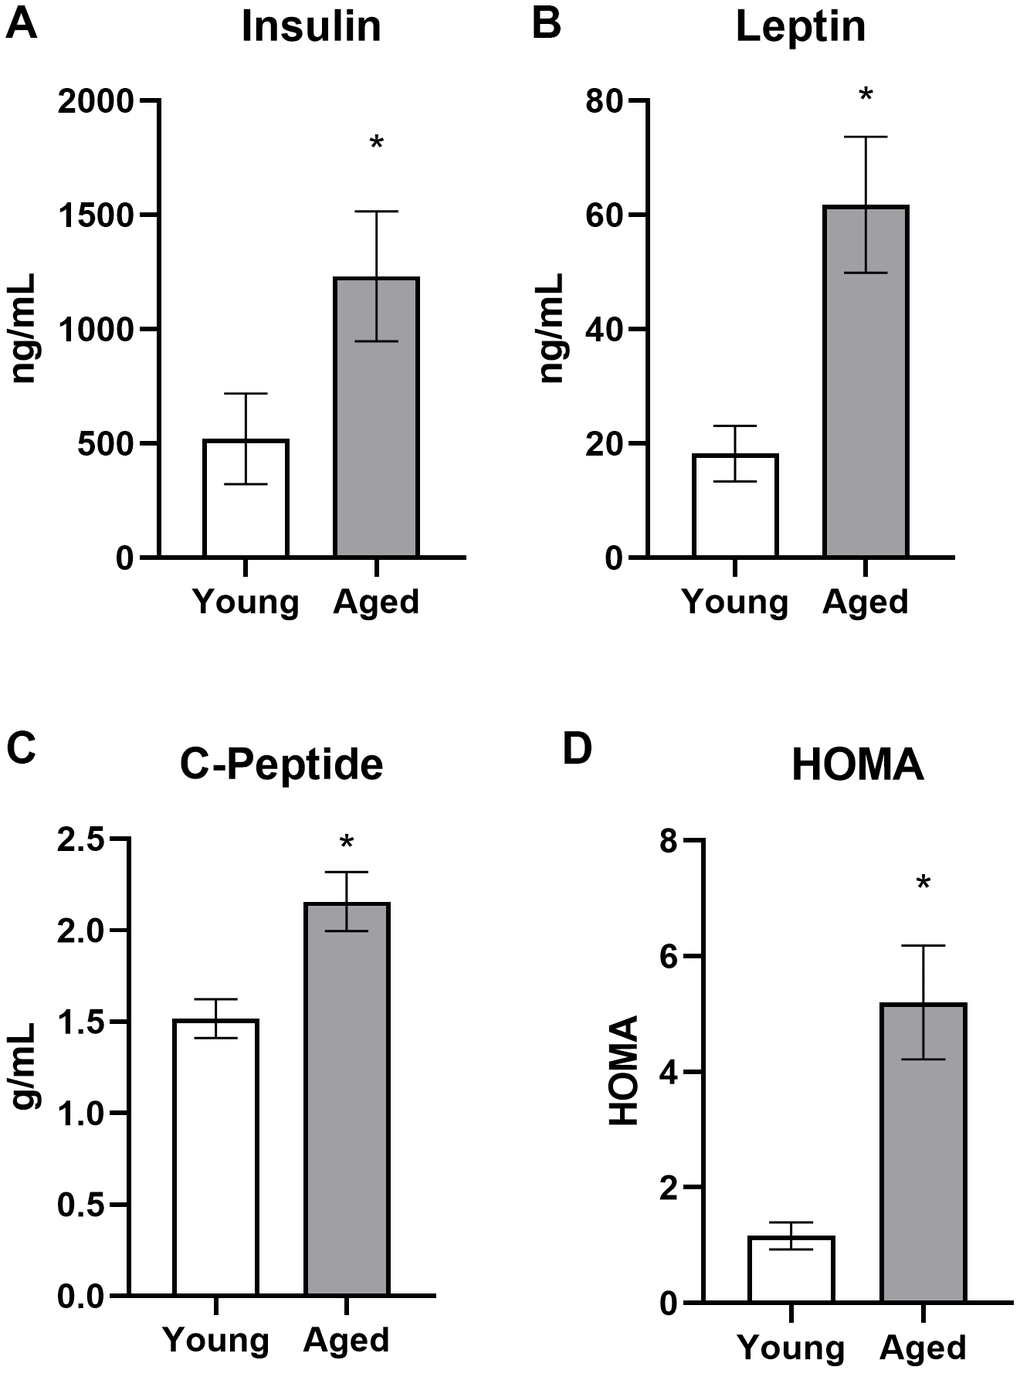 Aged rats have impaired metabolic parameters when fed ad libitum. Aged rats had significantly elevated (A) insulin, (B) leptin, (C) C-peptide and (D) HOMA levels relative to young rats when fed standard rodent chow ad libitum. Data are represented as group mean ± 1 SEM. * = p 